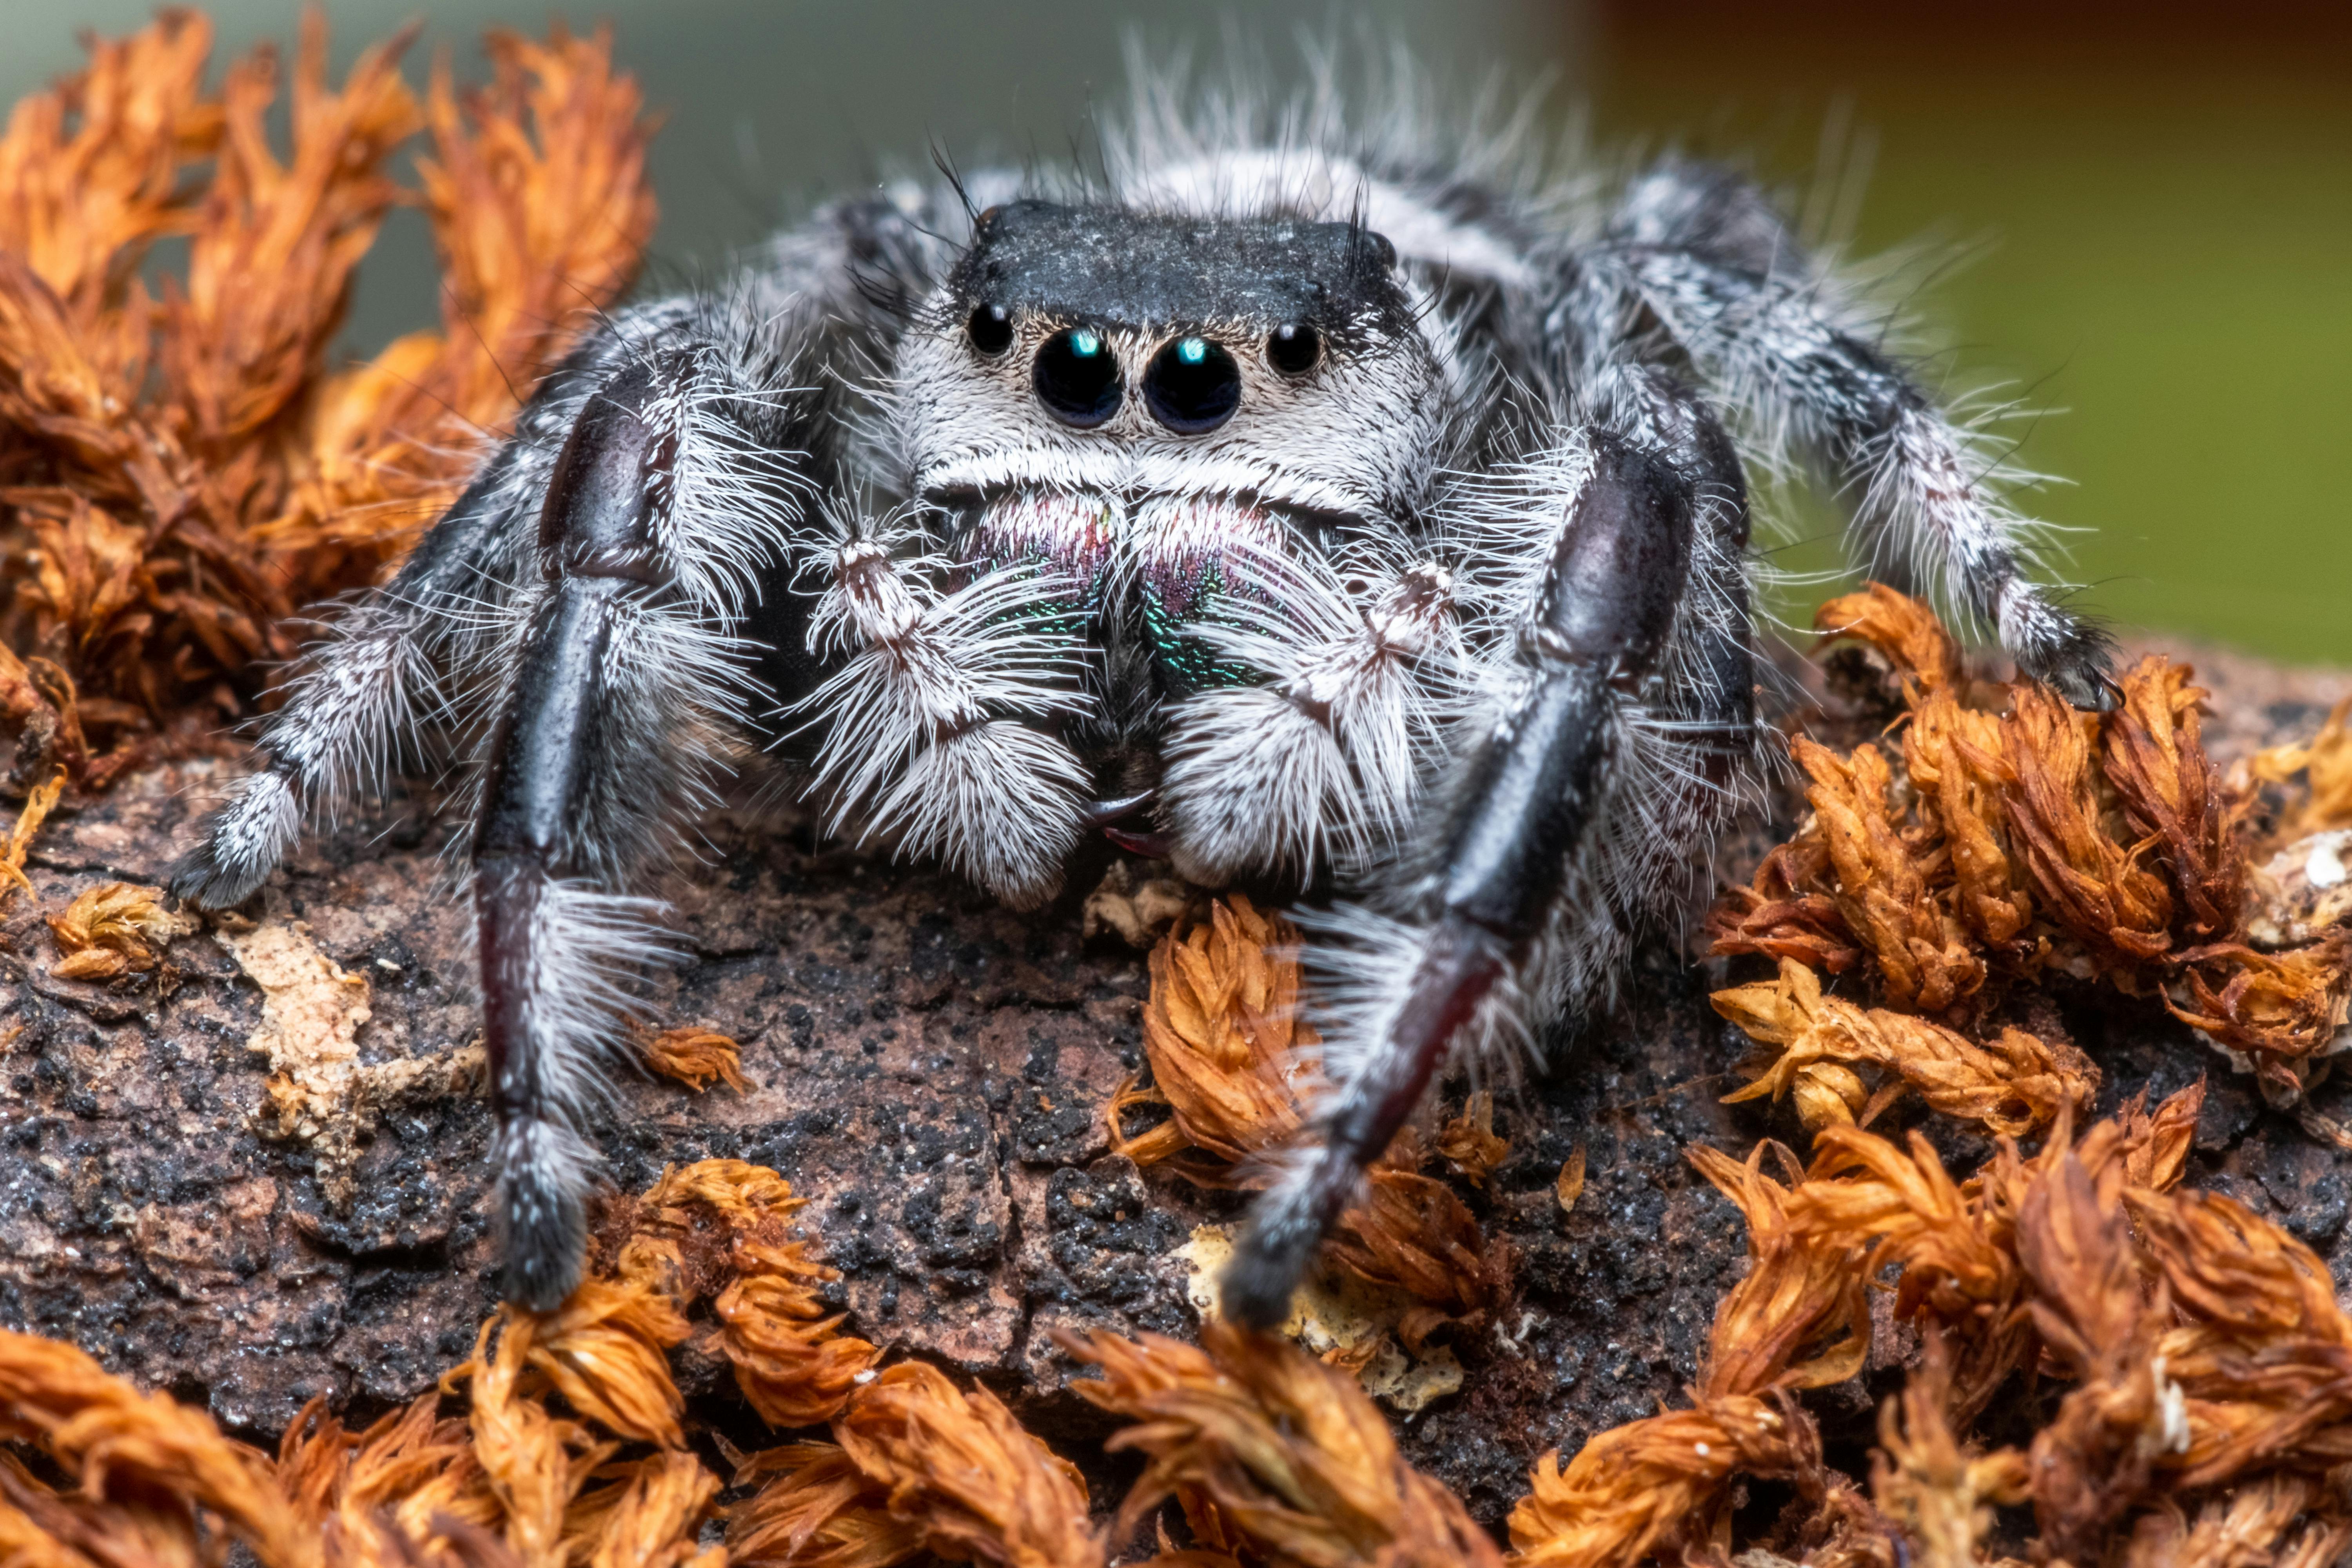 Are There Specific Environmental Factors That Increase The Risk Of Tarantula Parasitism?